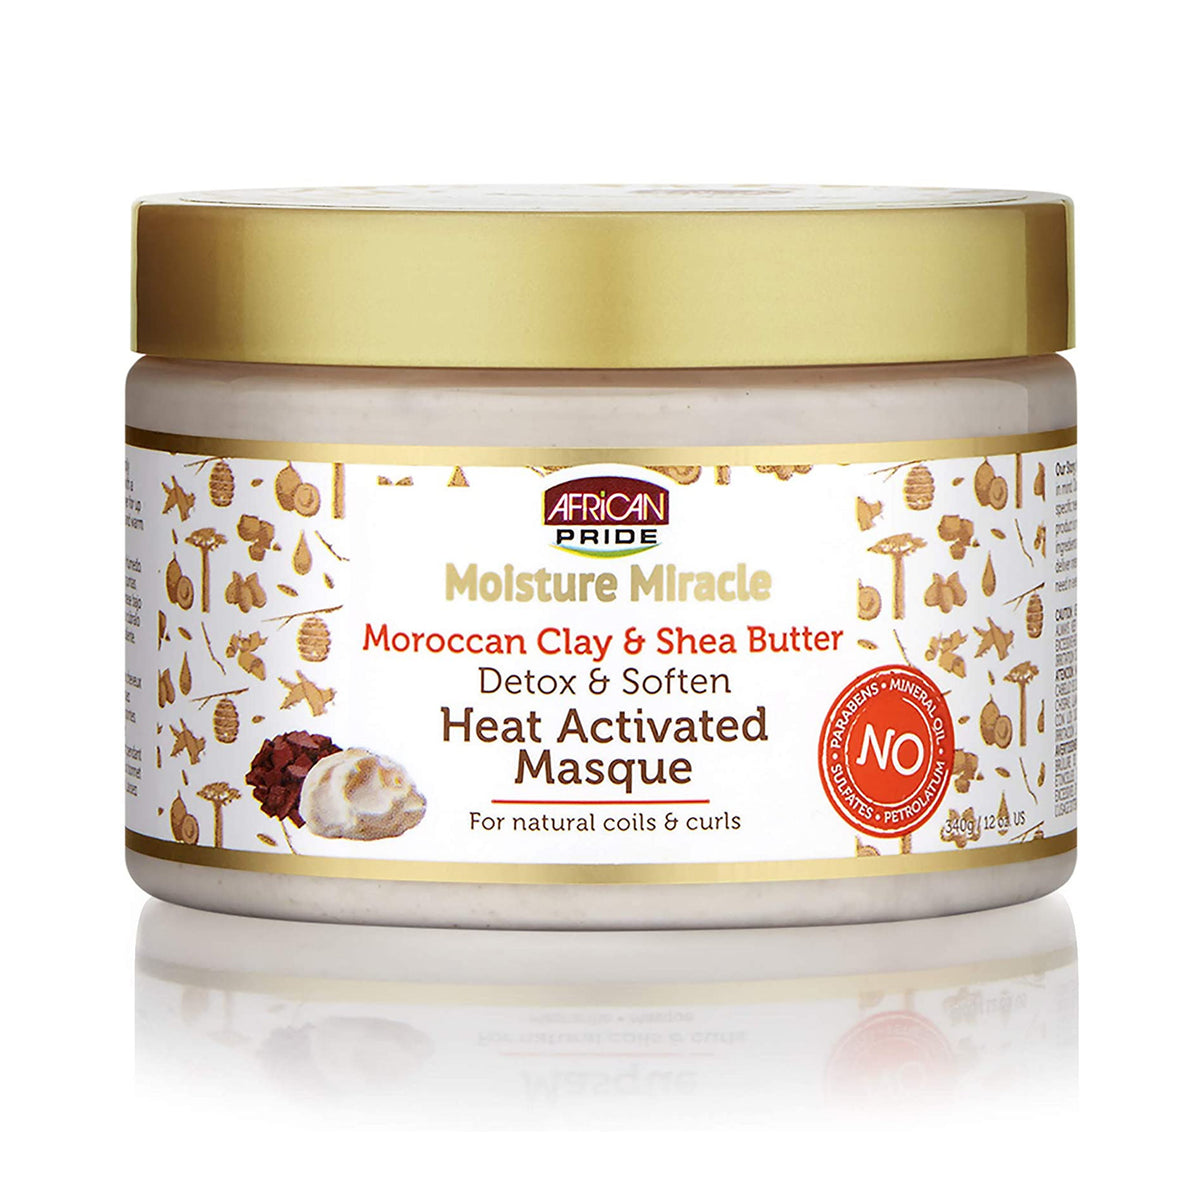 African Pride Moroccan Clay & Shea Butter Heat Activated Masque 340g- AQ Online